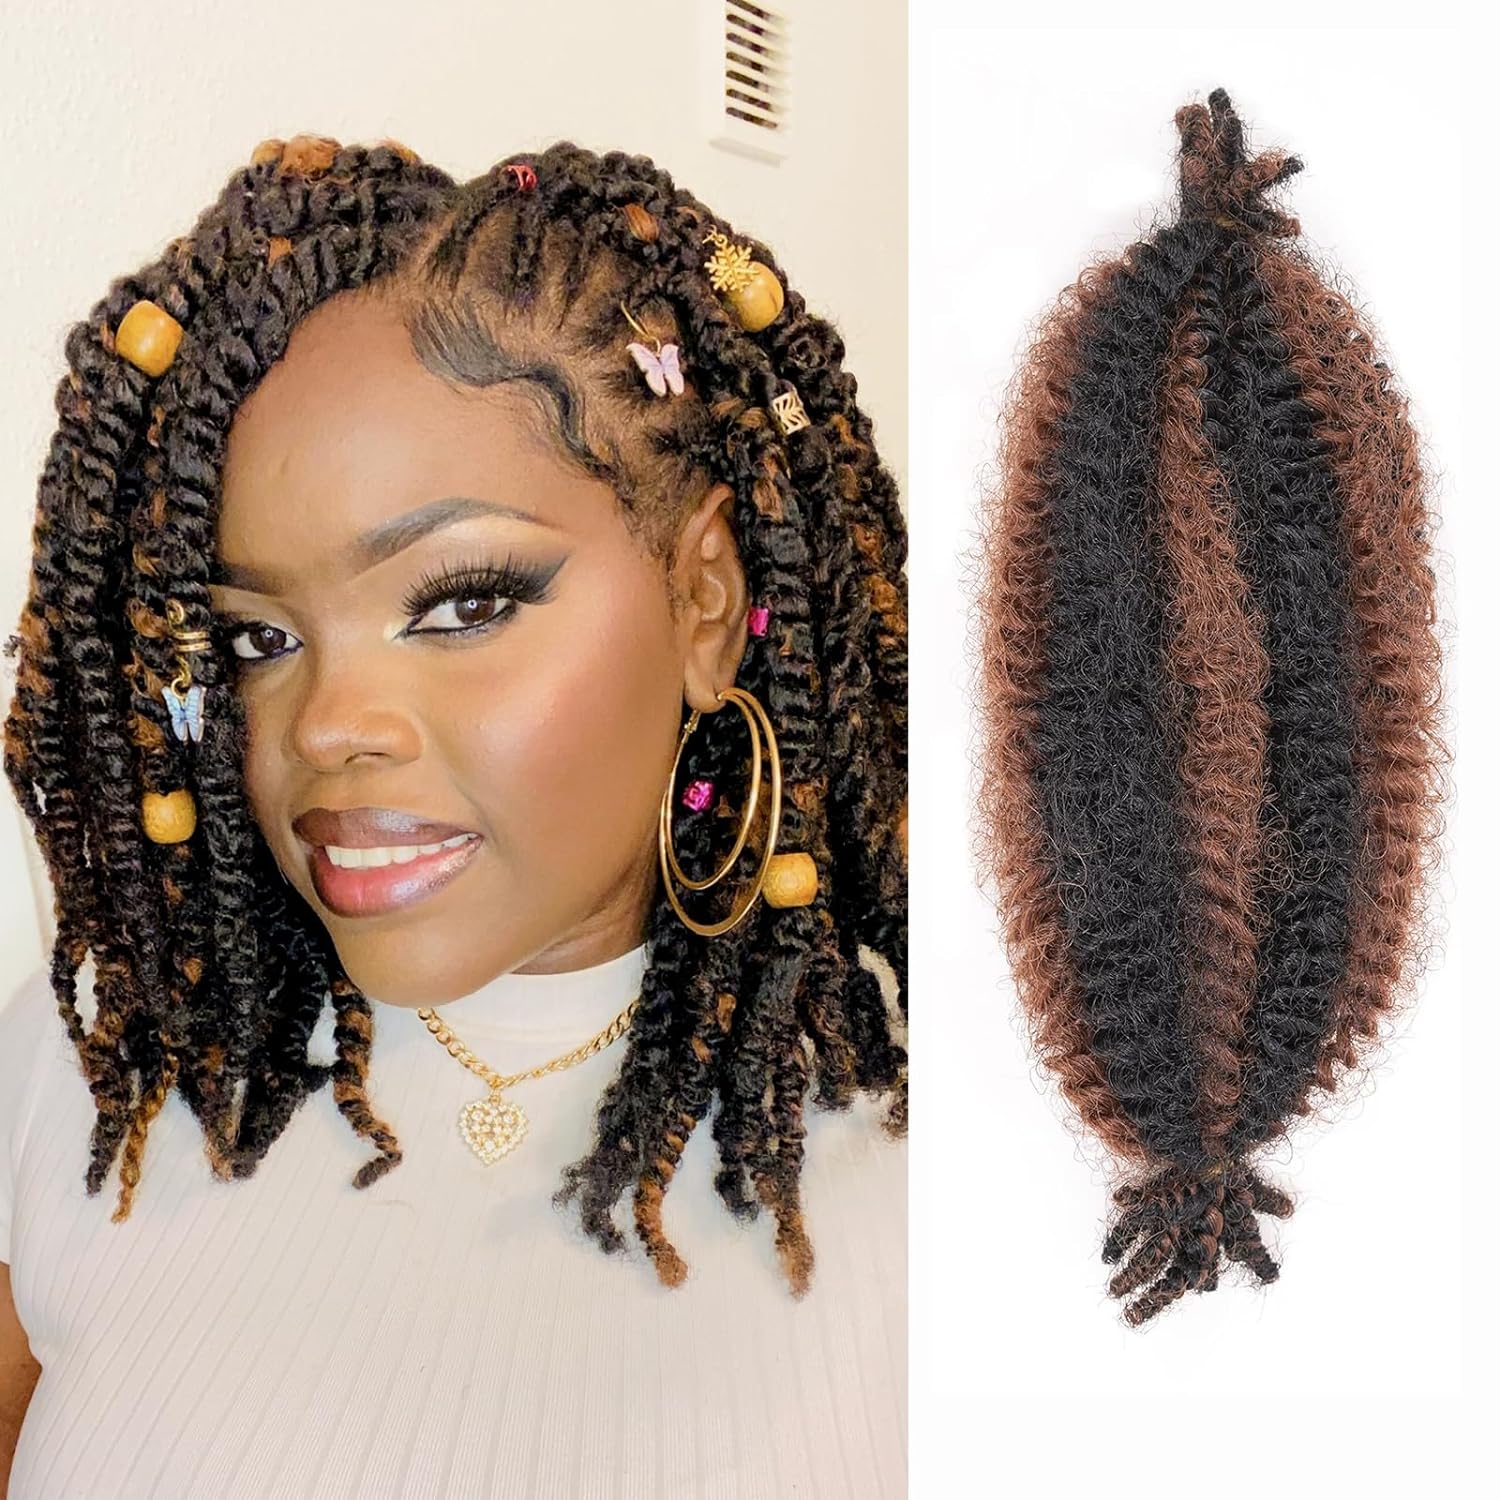 FAST SHIPPING 3-5 DAY SA | ToyoTress Springy Afro Twist Hair - Short Black Marley Hair For Faux Locs, Afro Kinky Curly Marley Twist Braiding Hair Extensions Synthetic